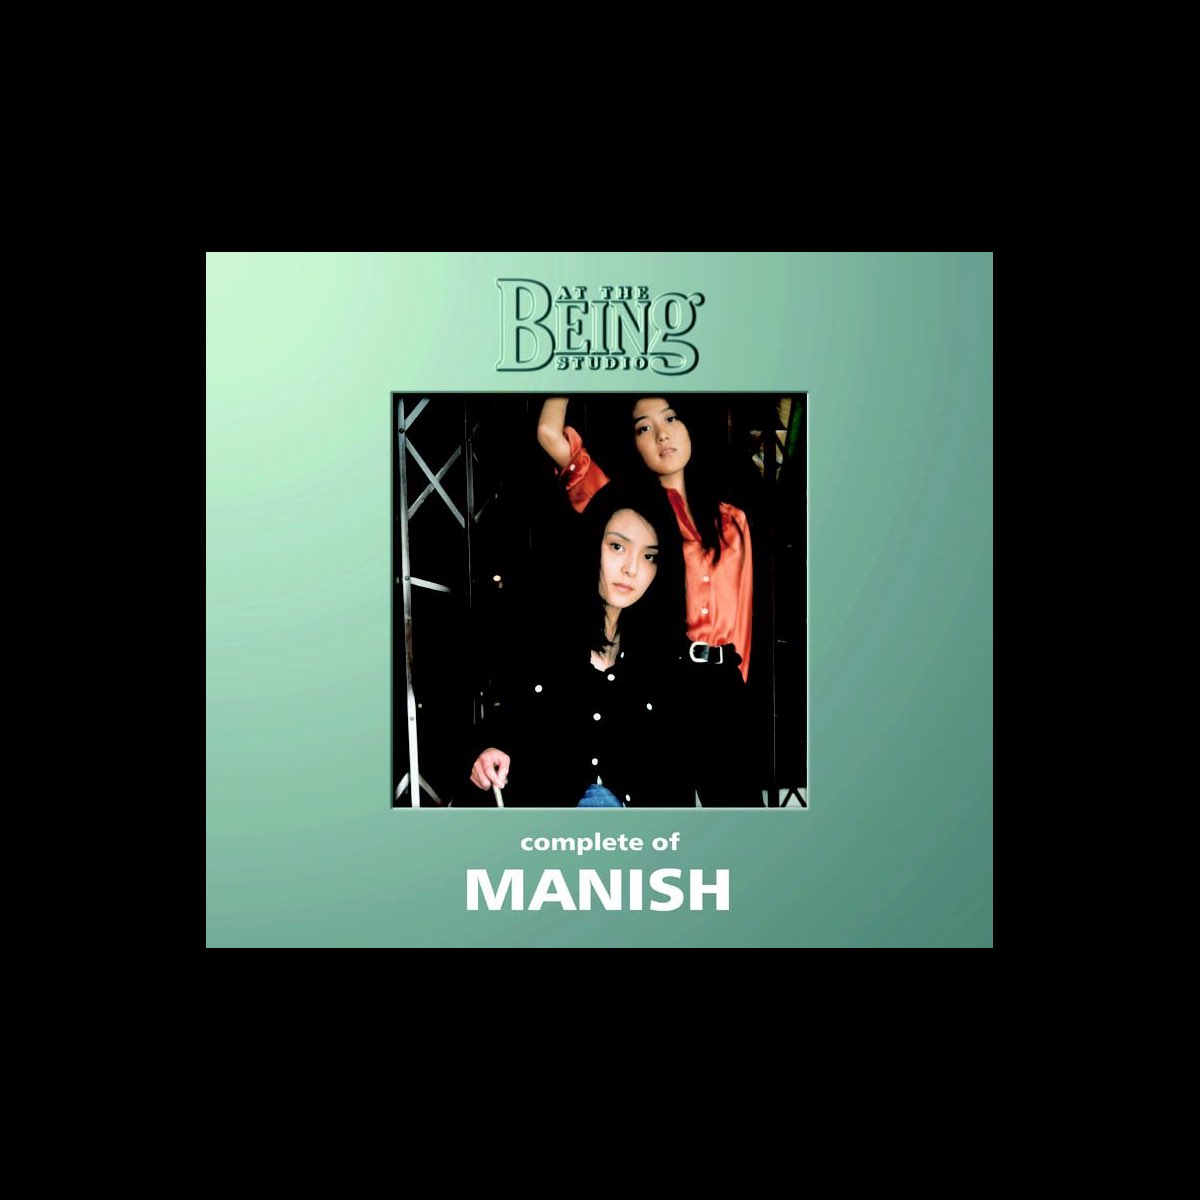 Complete of MANISH: At the Being Studio - Album by Manish - Apple